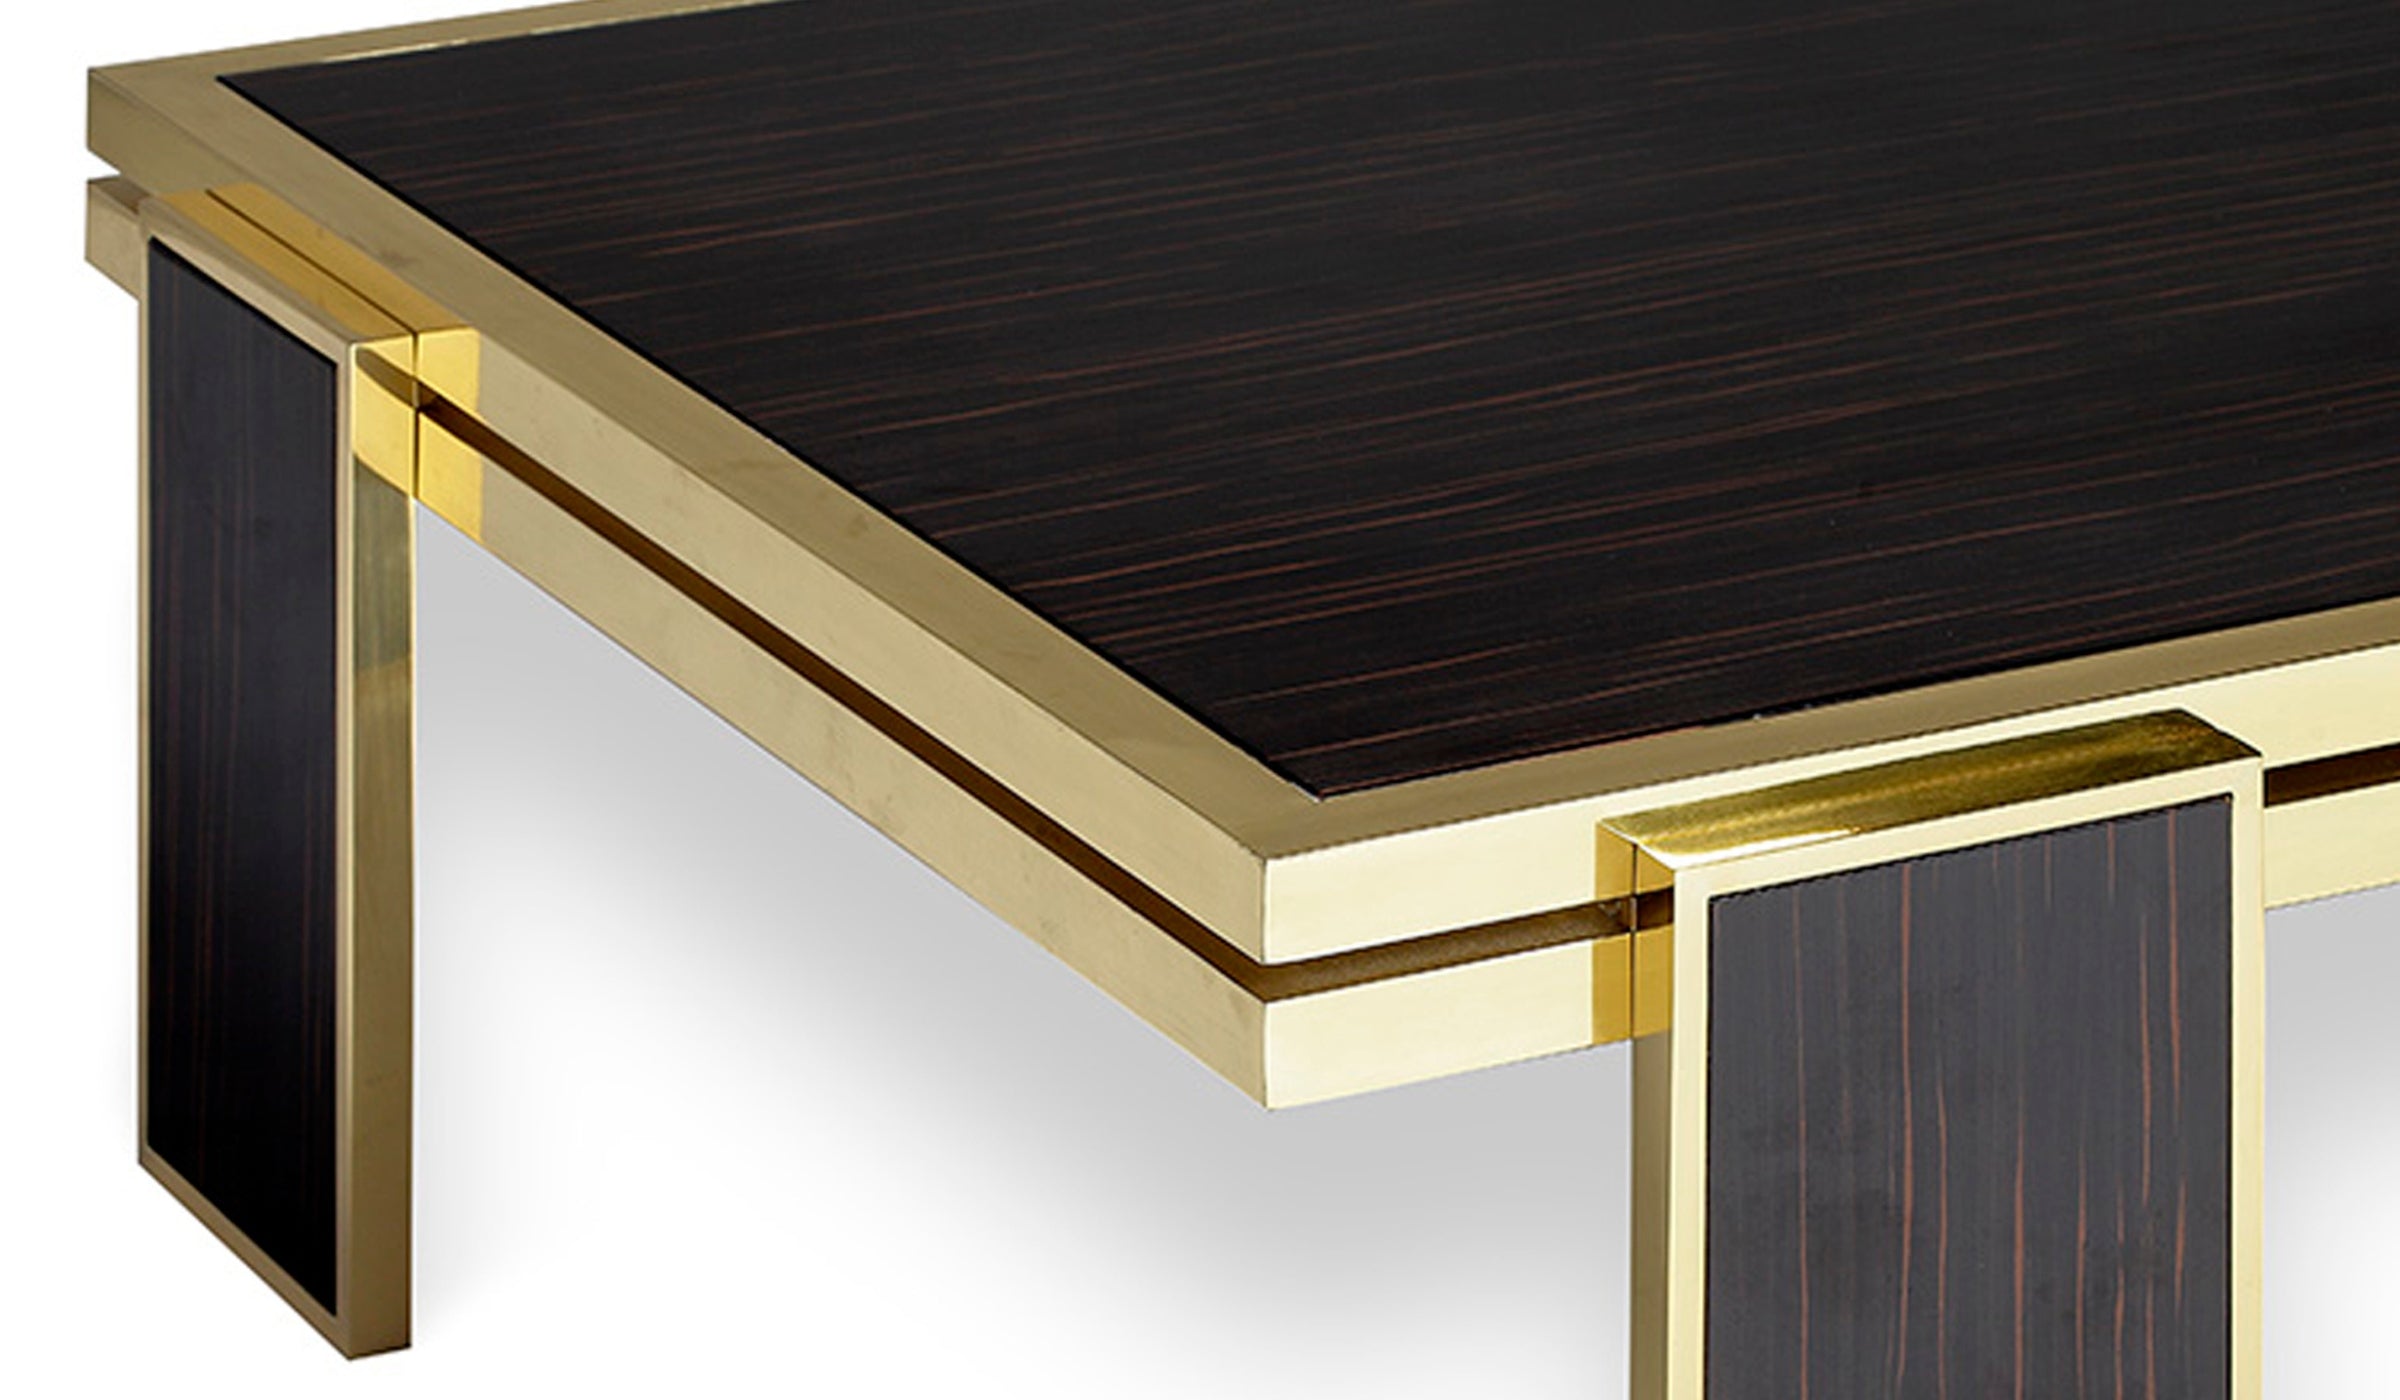 James - Polished brass and ebony wood coffee table with glossy lacquer finish